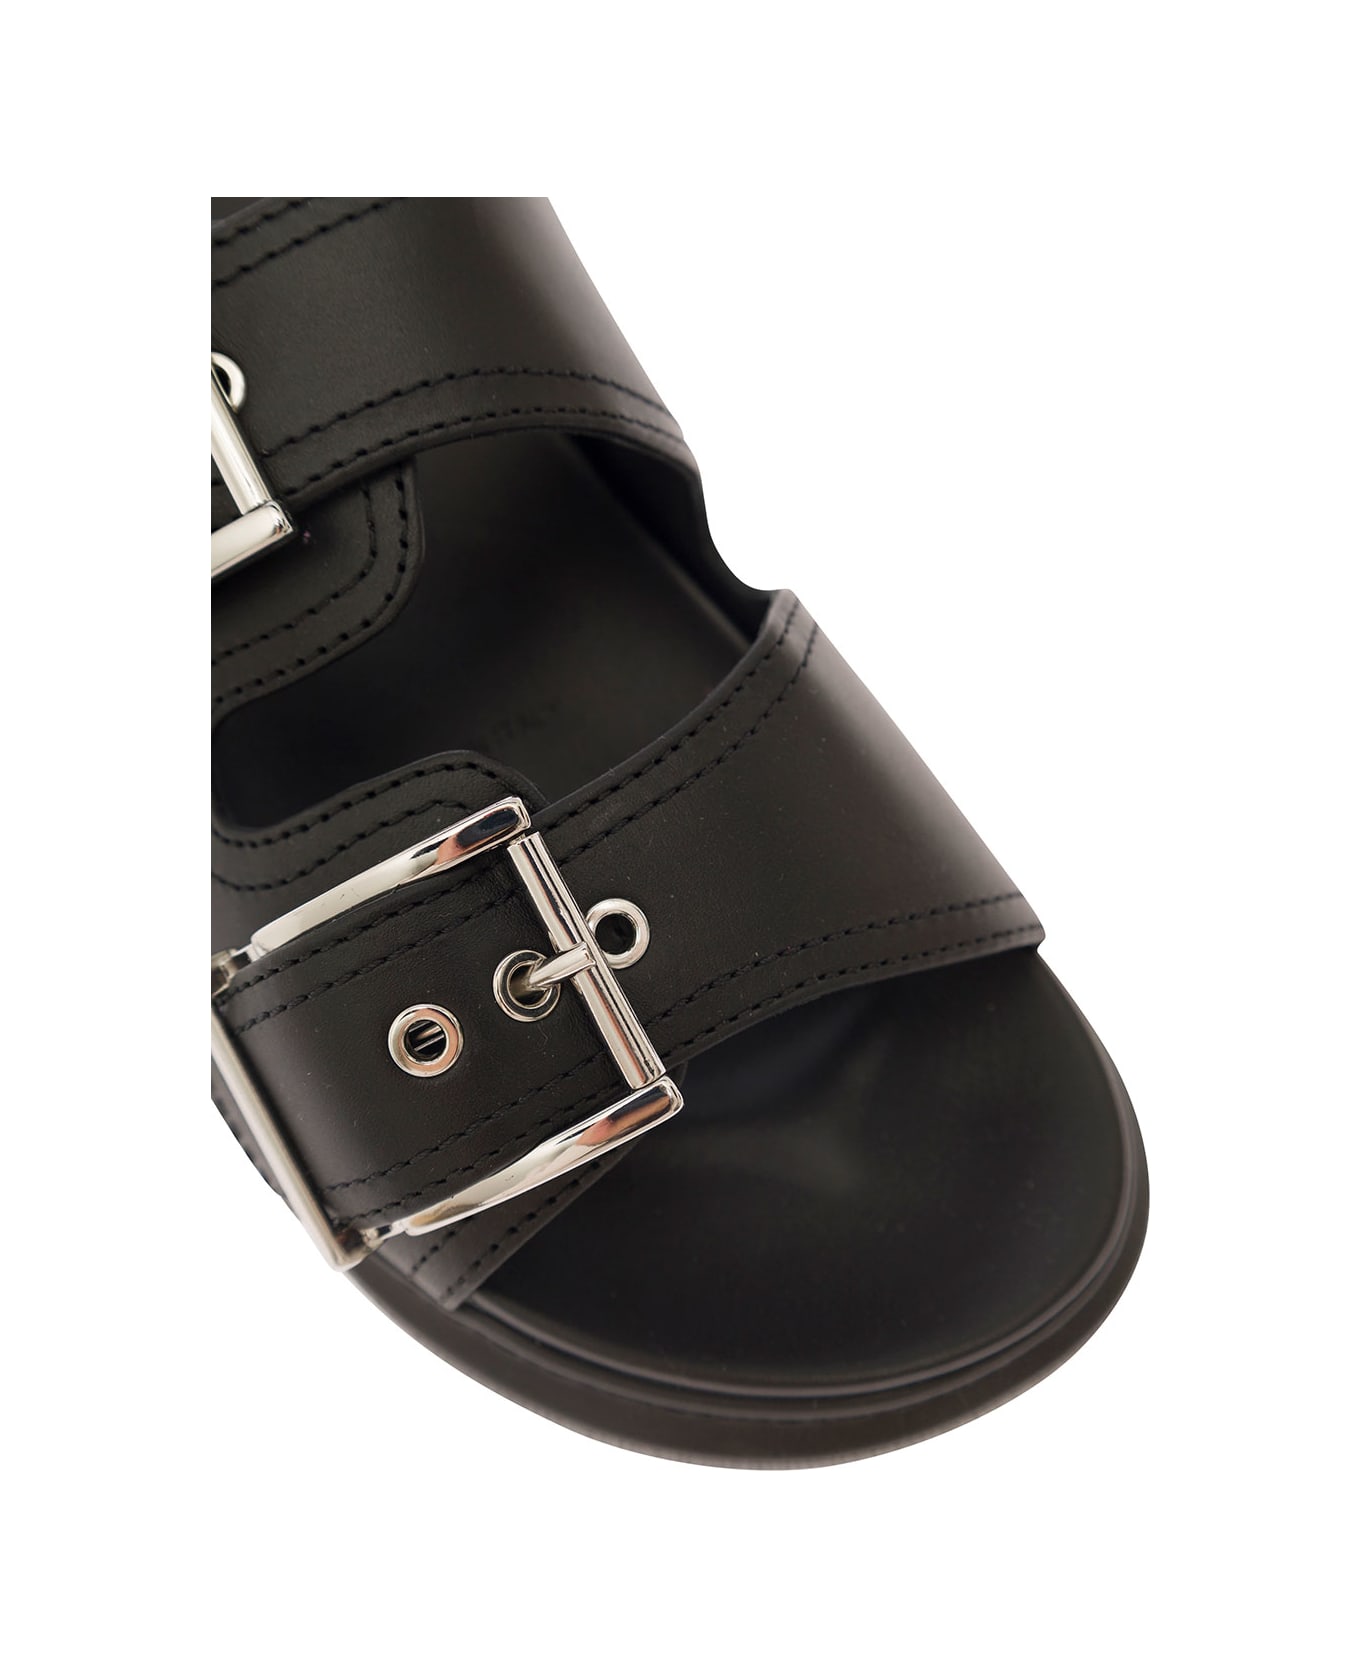 Alexander McQueen Black Sandals With Double-straps In Leather Woman - Black サンダル